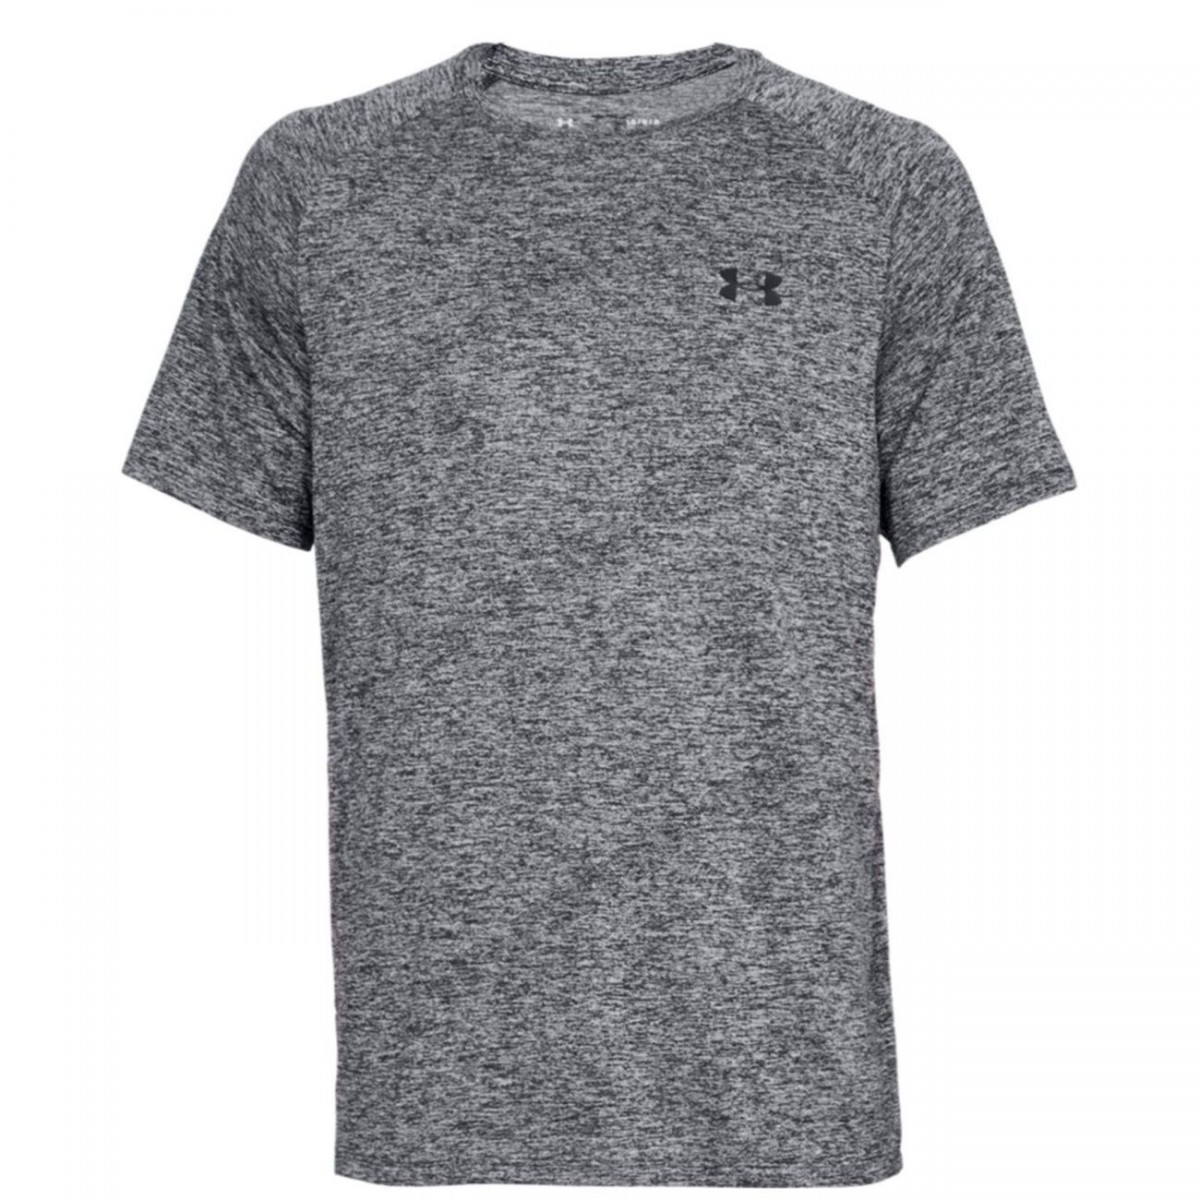 Under Armour/running adulte UNDER ARMOUR Maillot running manches courtes - Homme - UA005 - gris √ Nouveau style √ Soldes - -5